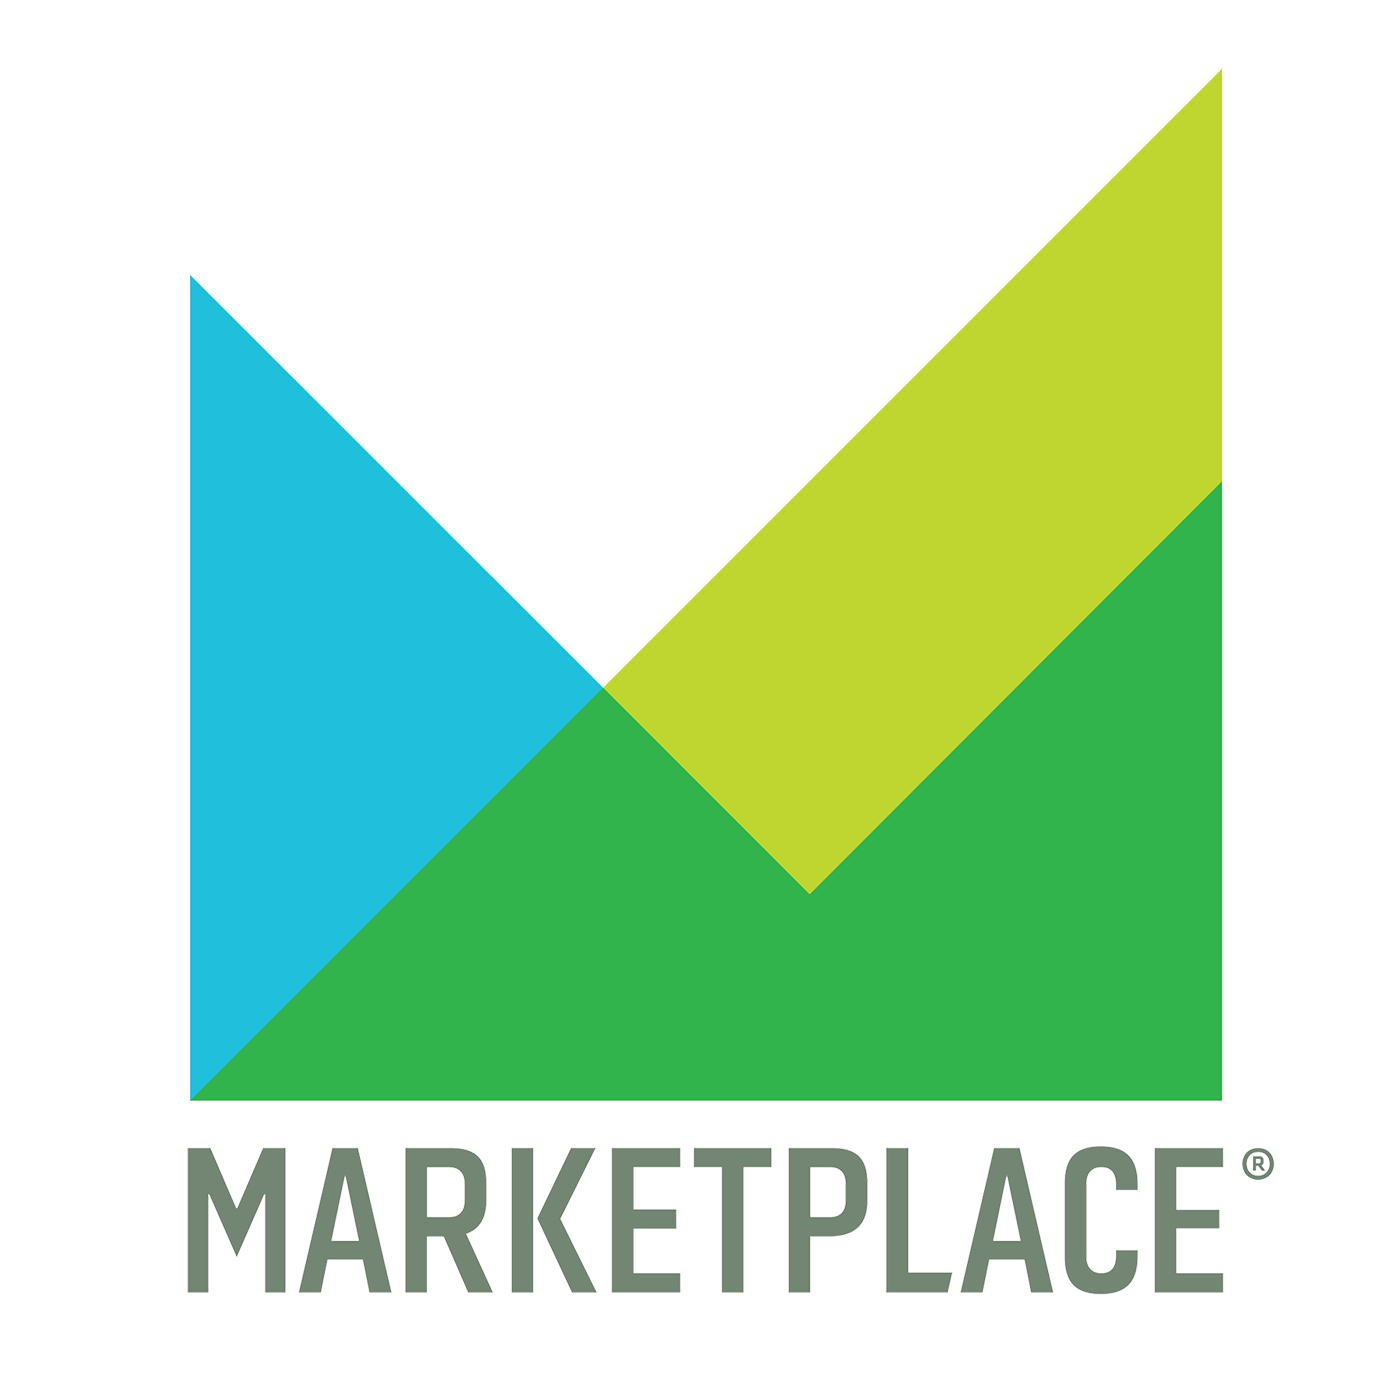 Gretchen Blough Talks About The Unexpected on Marketplace